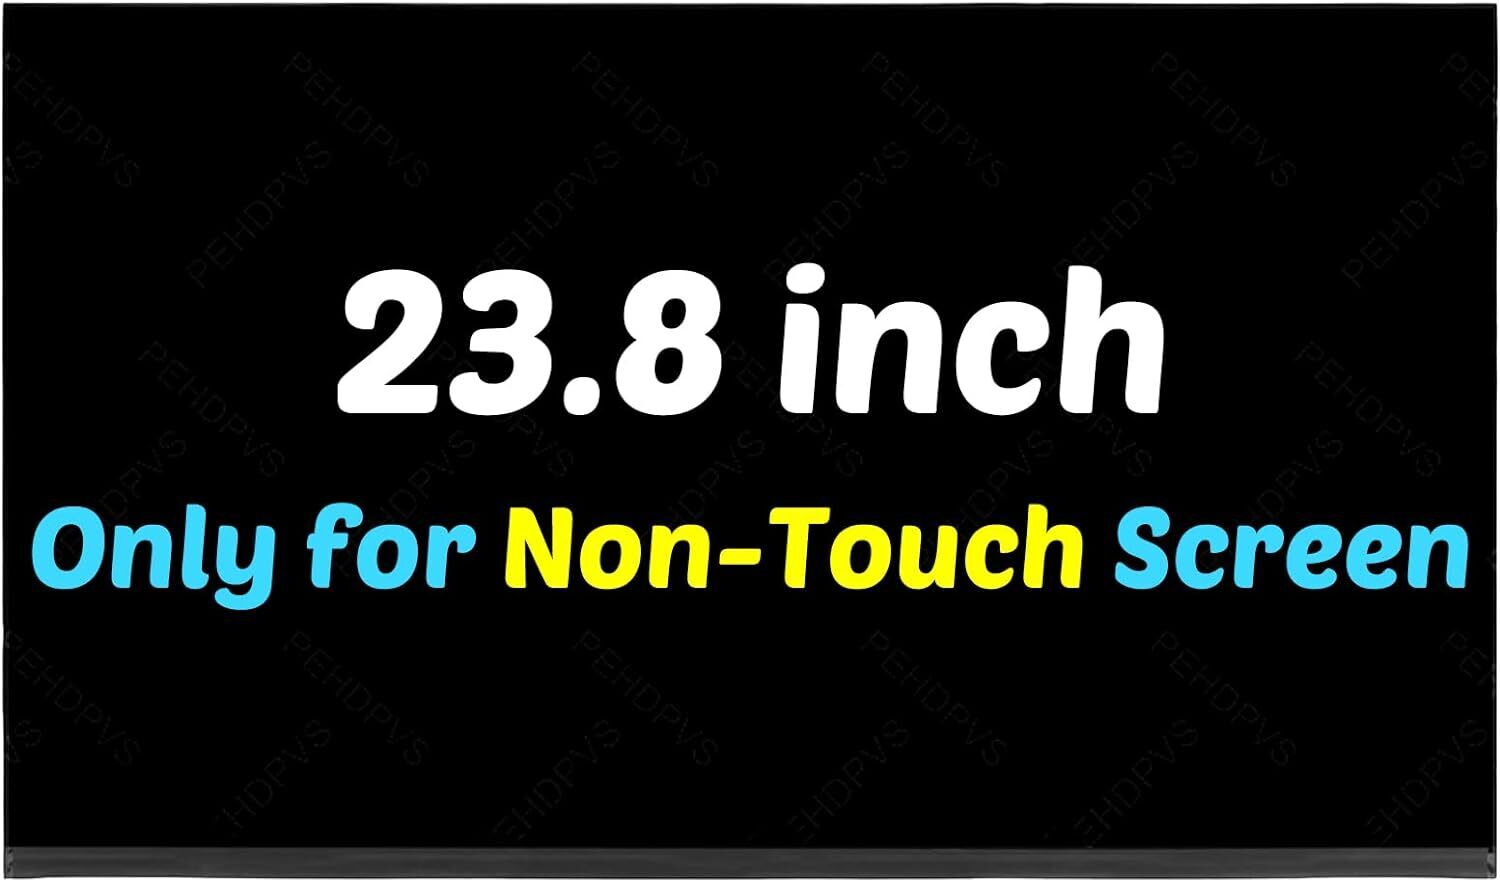 NEW DELL MV238FHM-N20 CWWCP / WCRJP LED LCD Screen Panel Replacement 23.8